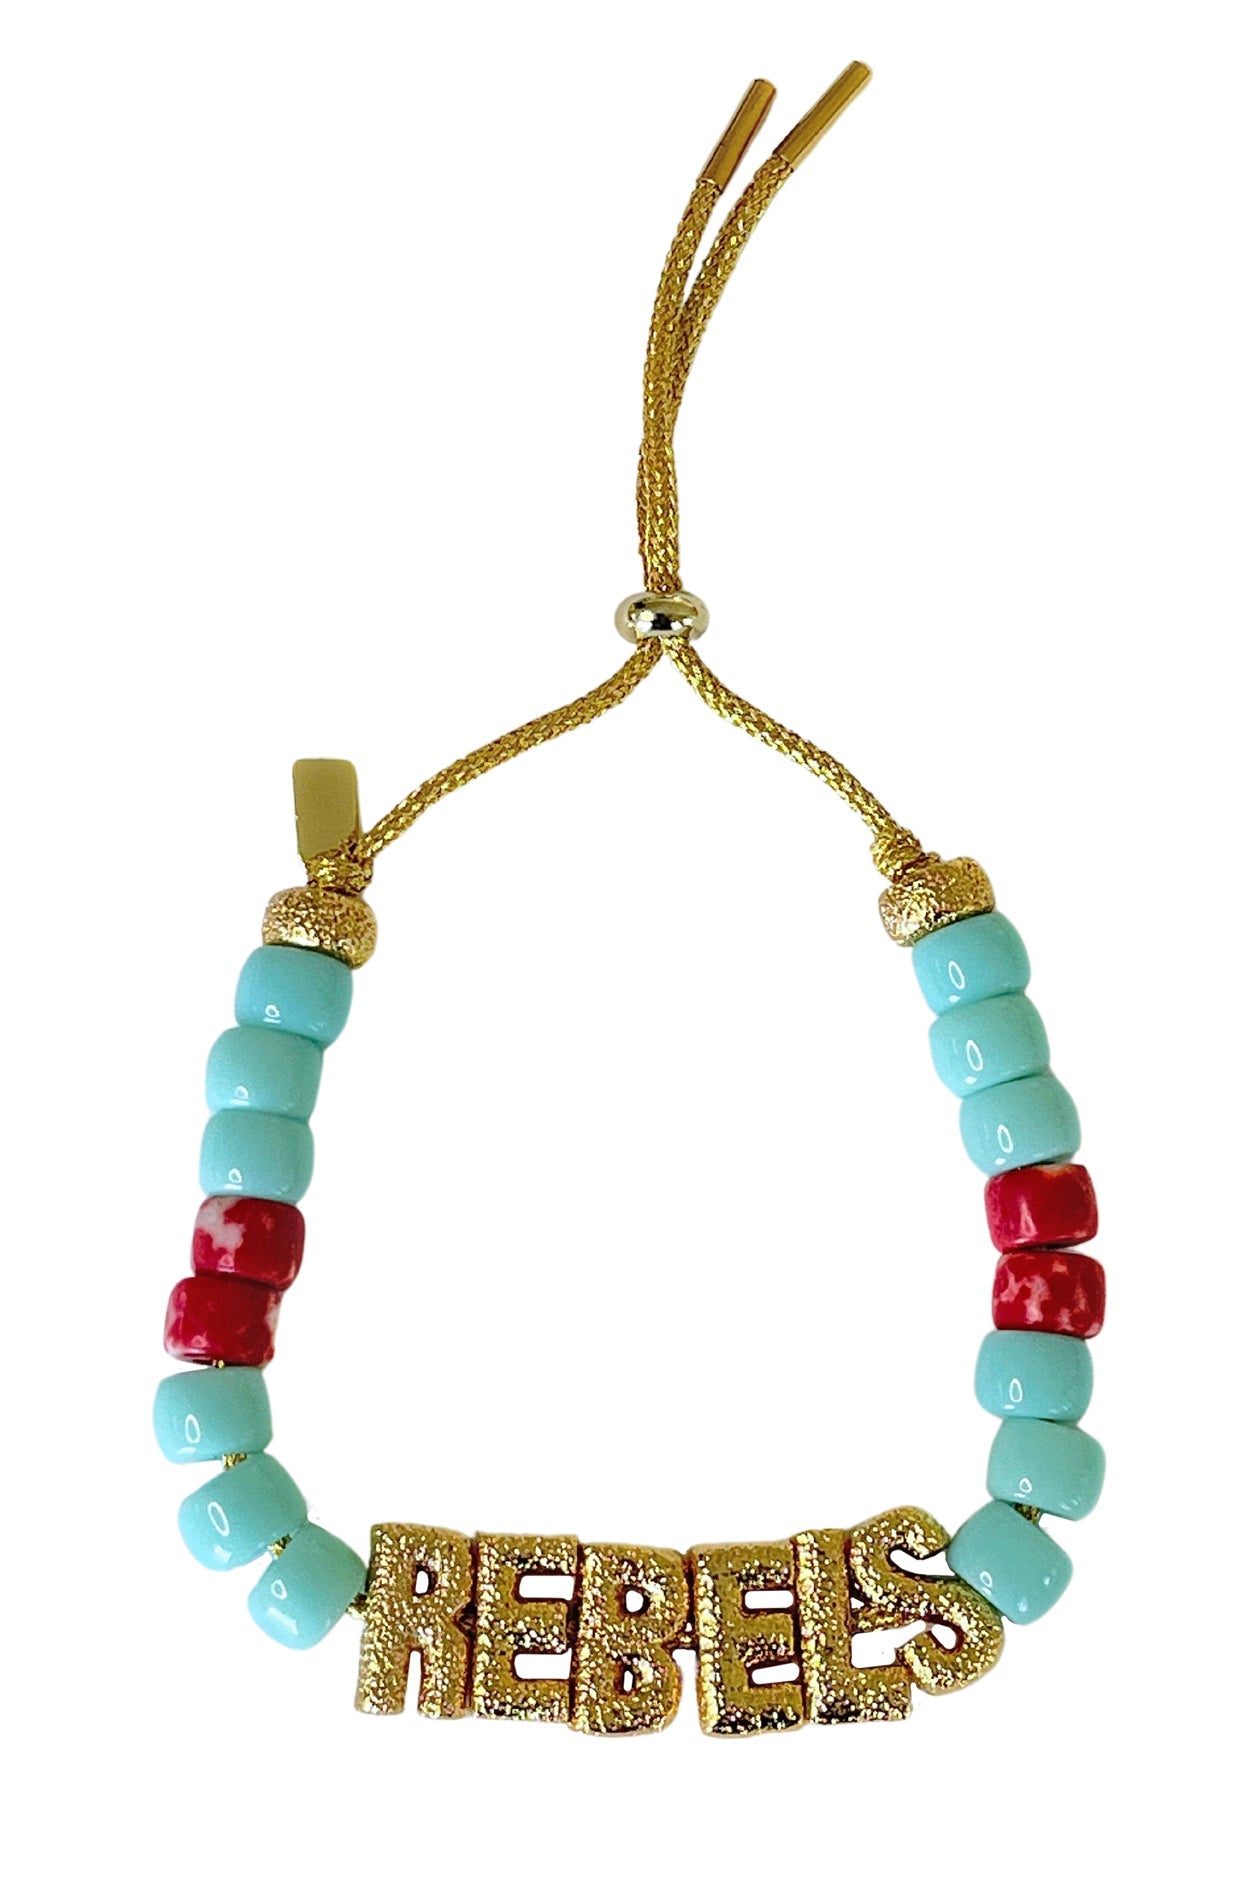 Blue + Red Eye Candy "Rebels" ID Bracelet - Lucky Star Jewels - Color Game